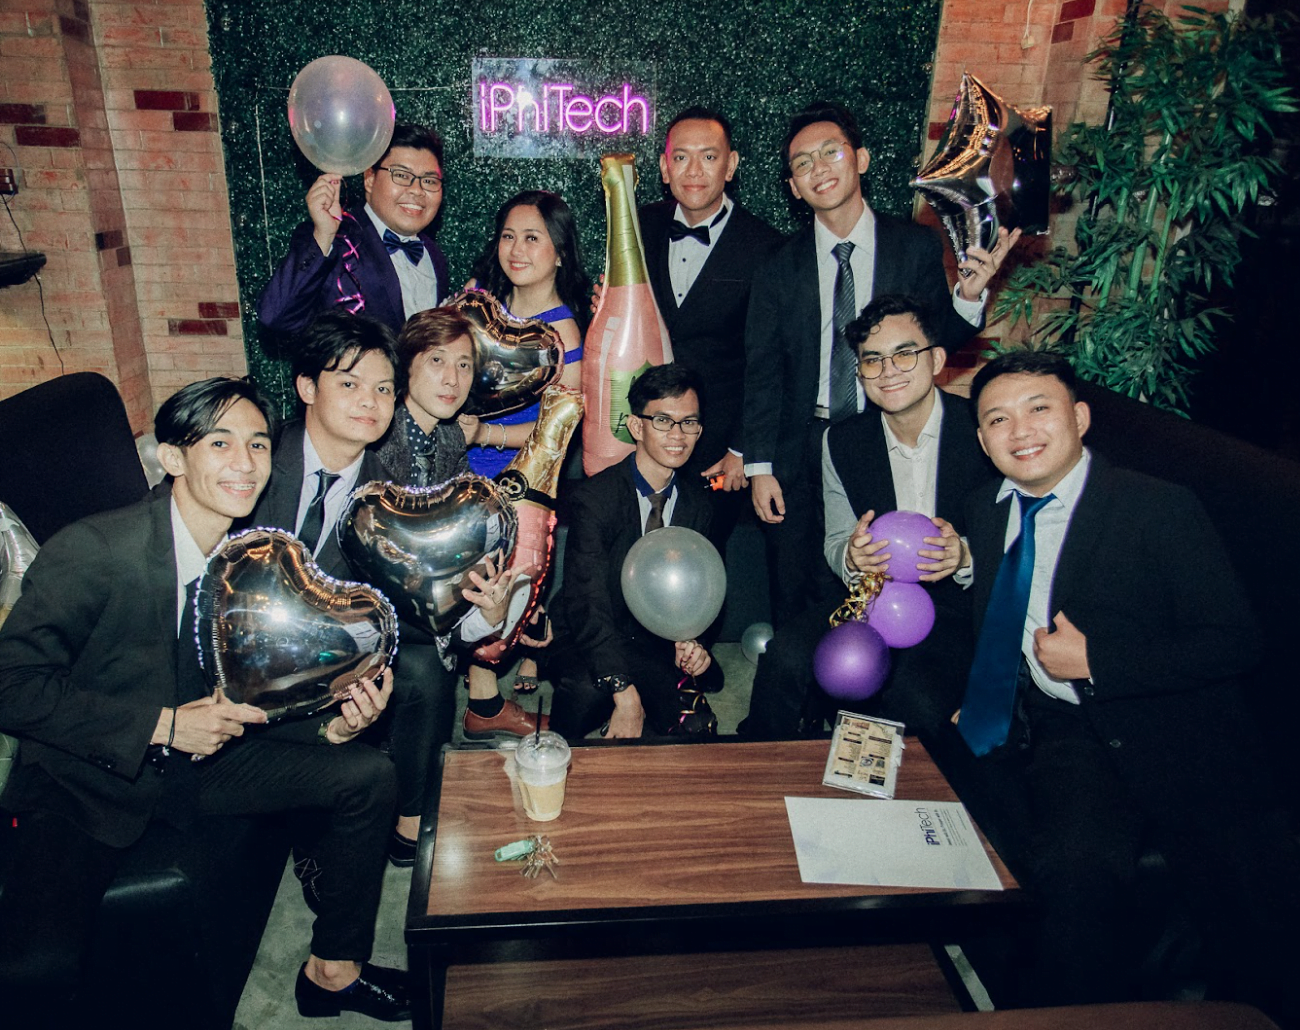 group of people having a party in a formal attire with balloons and a green backdrop with "iPhiTech" word